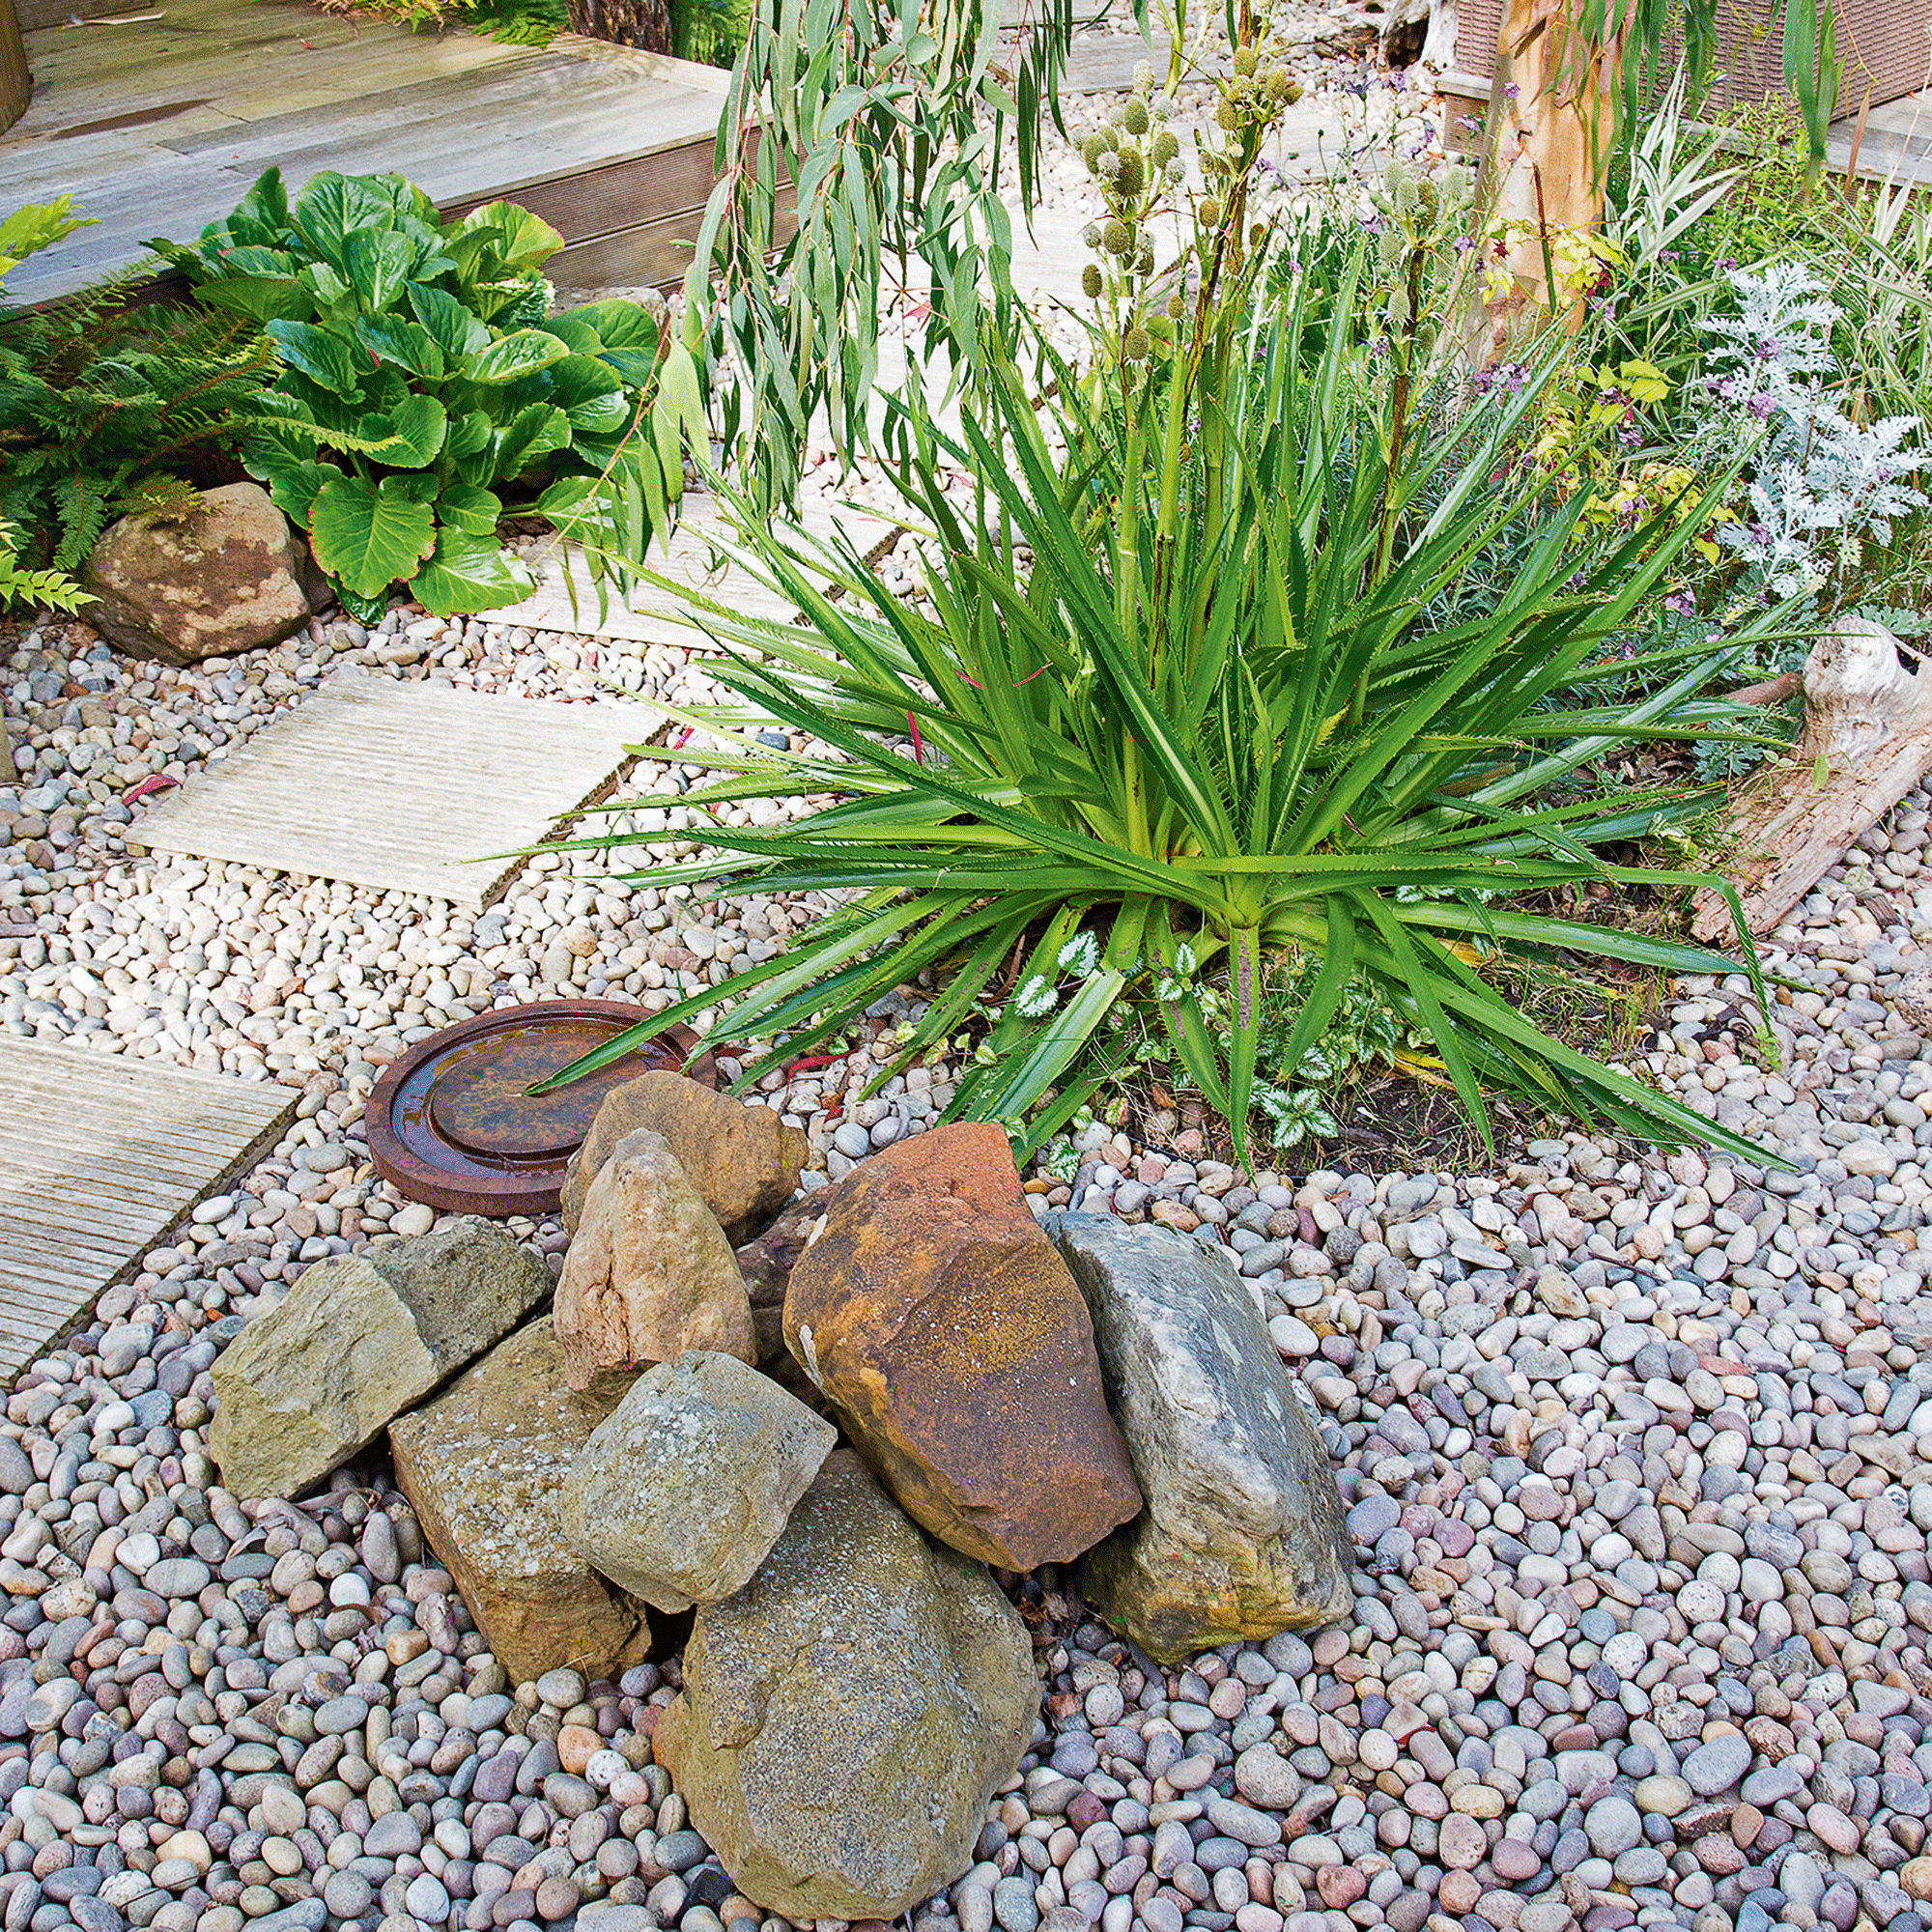 Rock garden ideas - Experts reveal the 10 best ways to add one to your garden